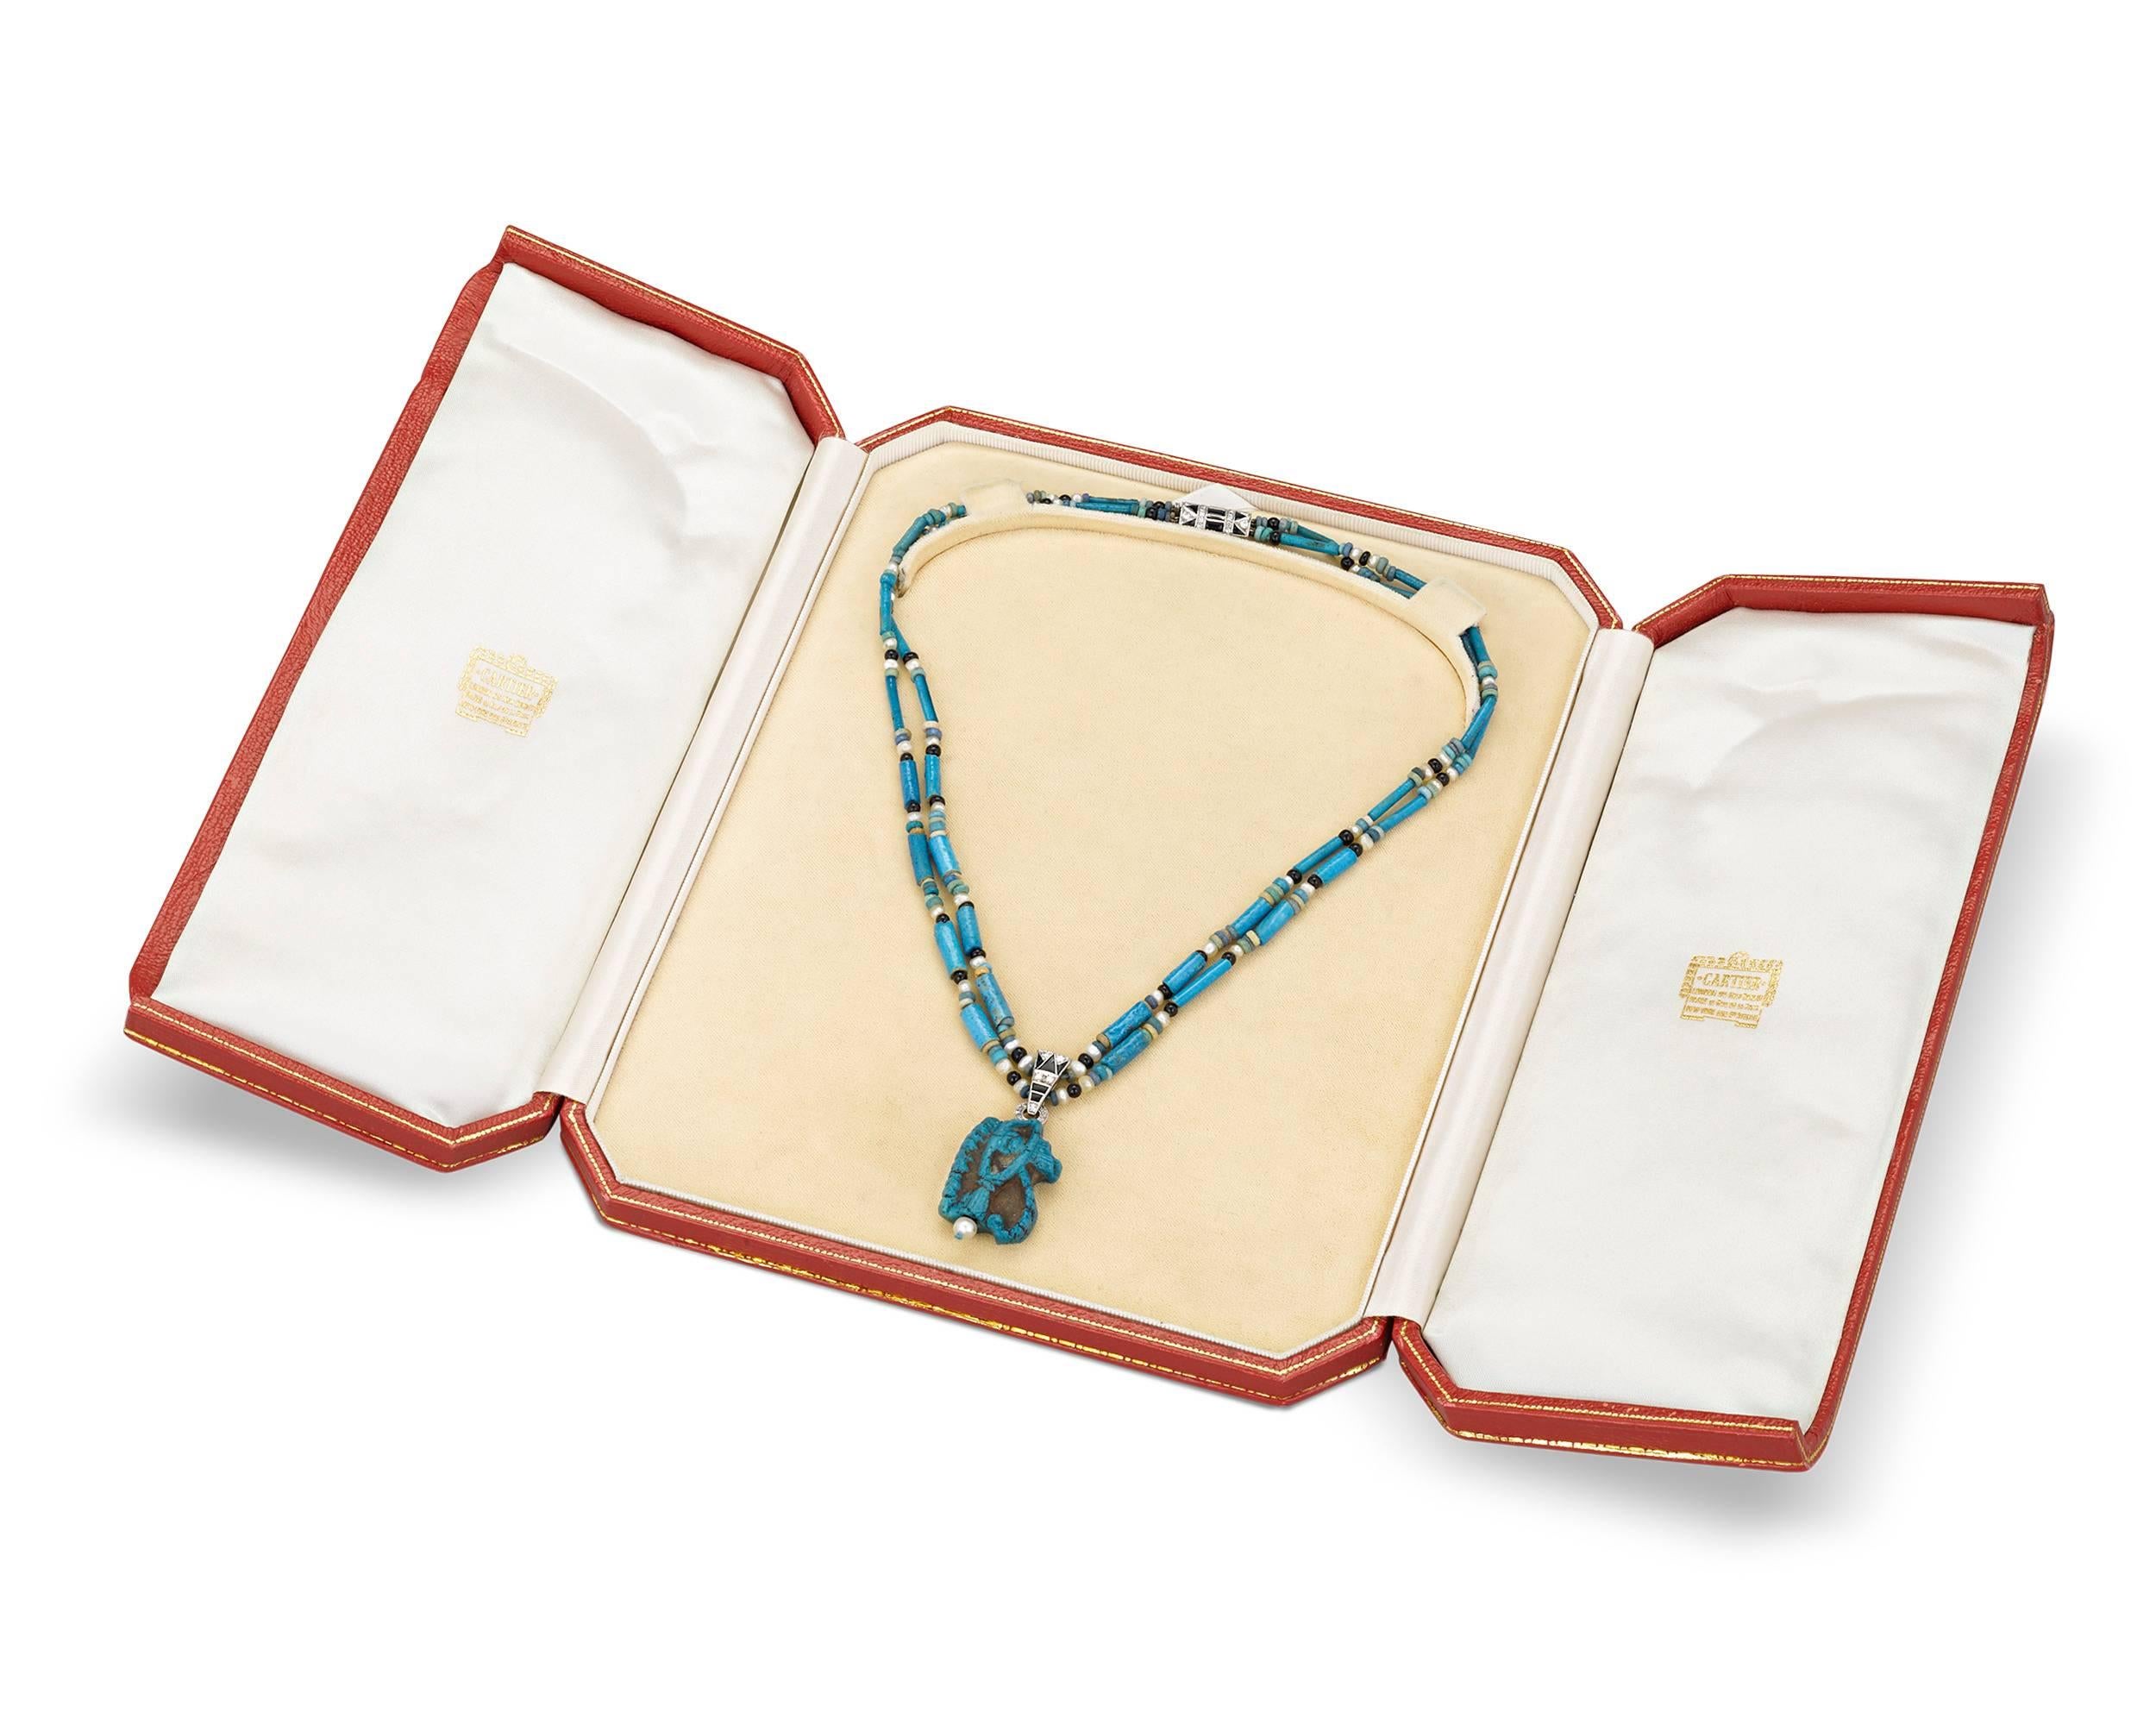 A marriage of ancient Egyptian artifacts and streamlined Art Deco style, this necklace by the legendary Cartier is a masterpiece of jewelry design. Crafted during the glamorous age of the Roaring 20s, the piece embodies one of the most enduring